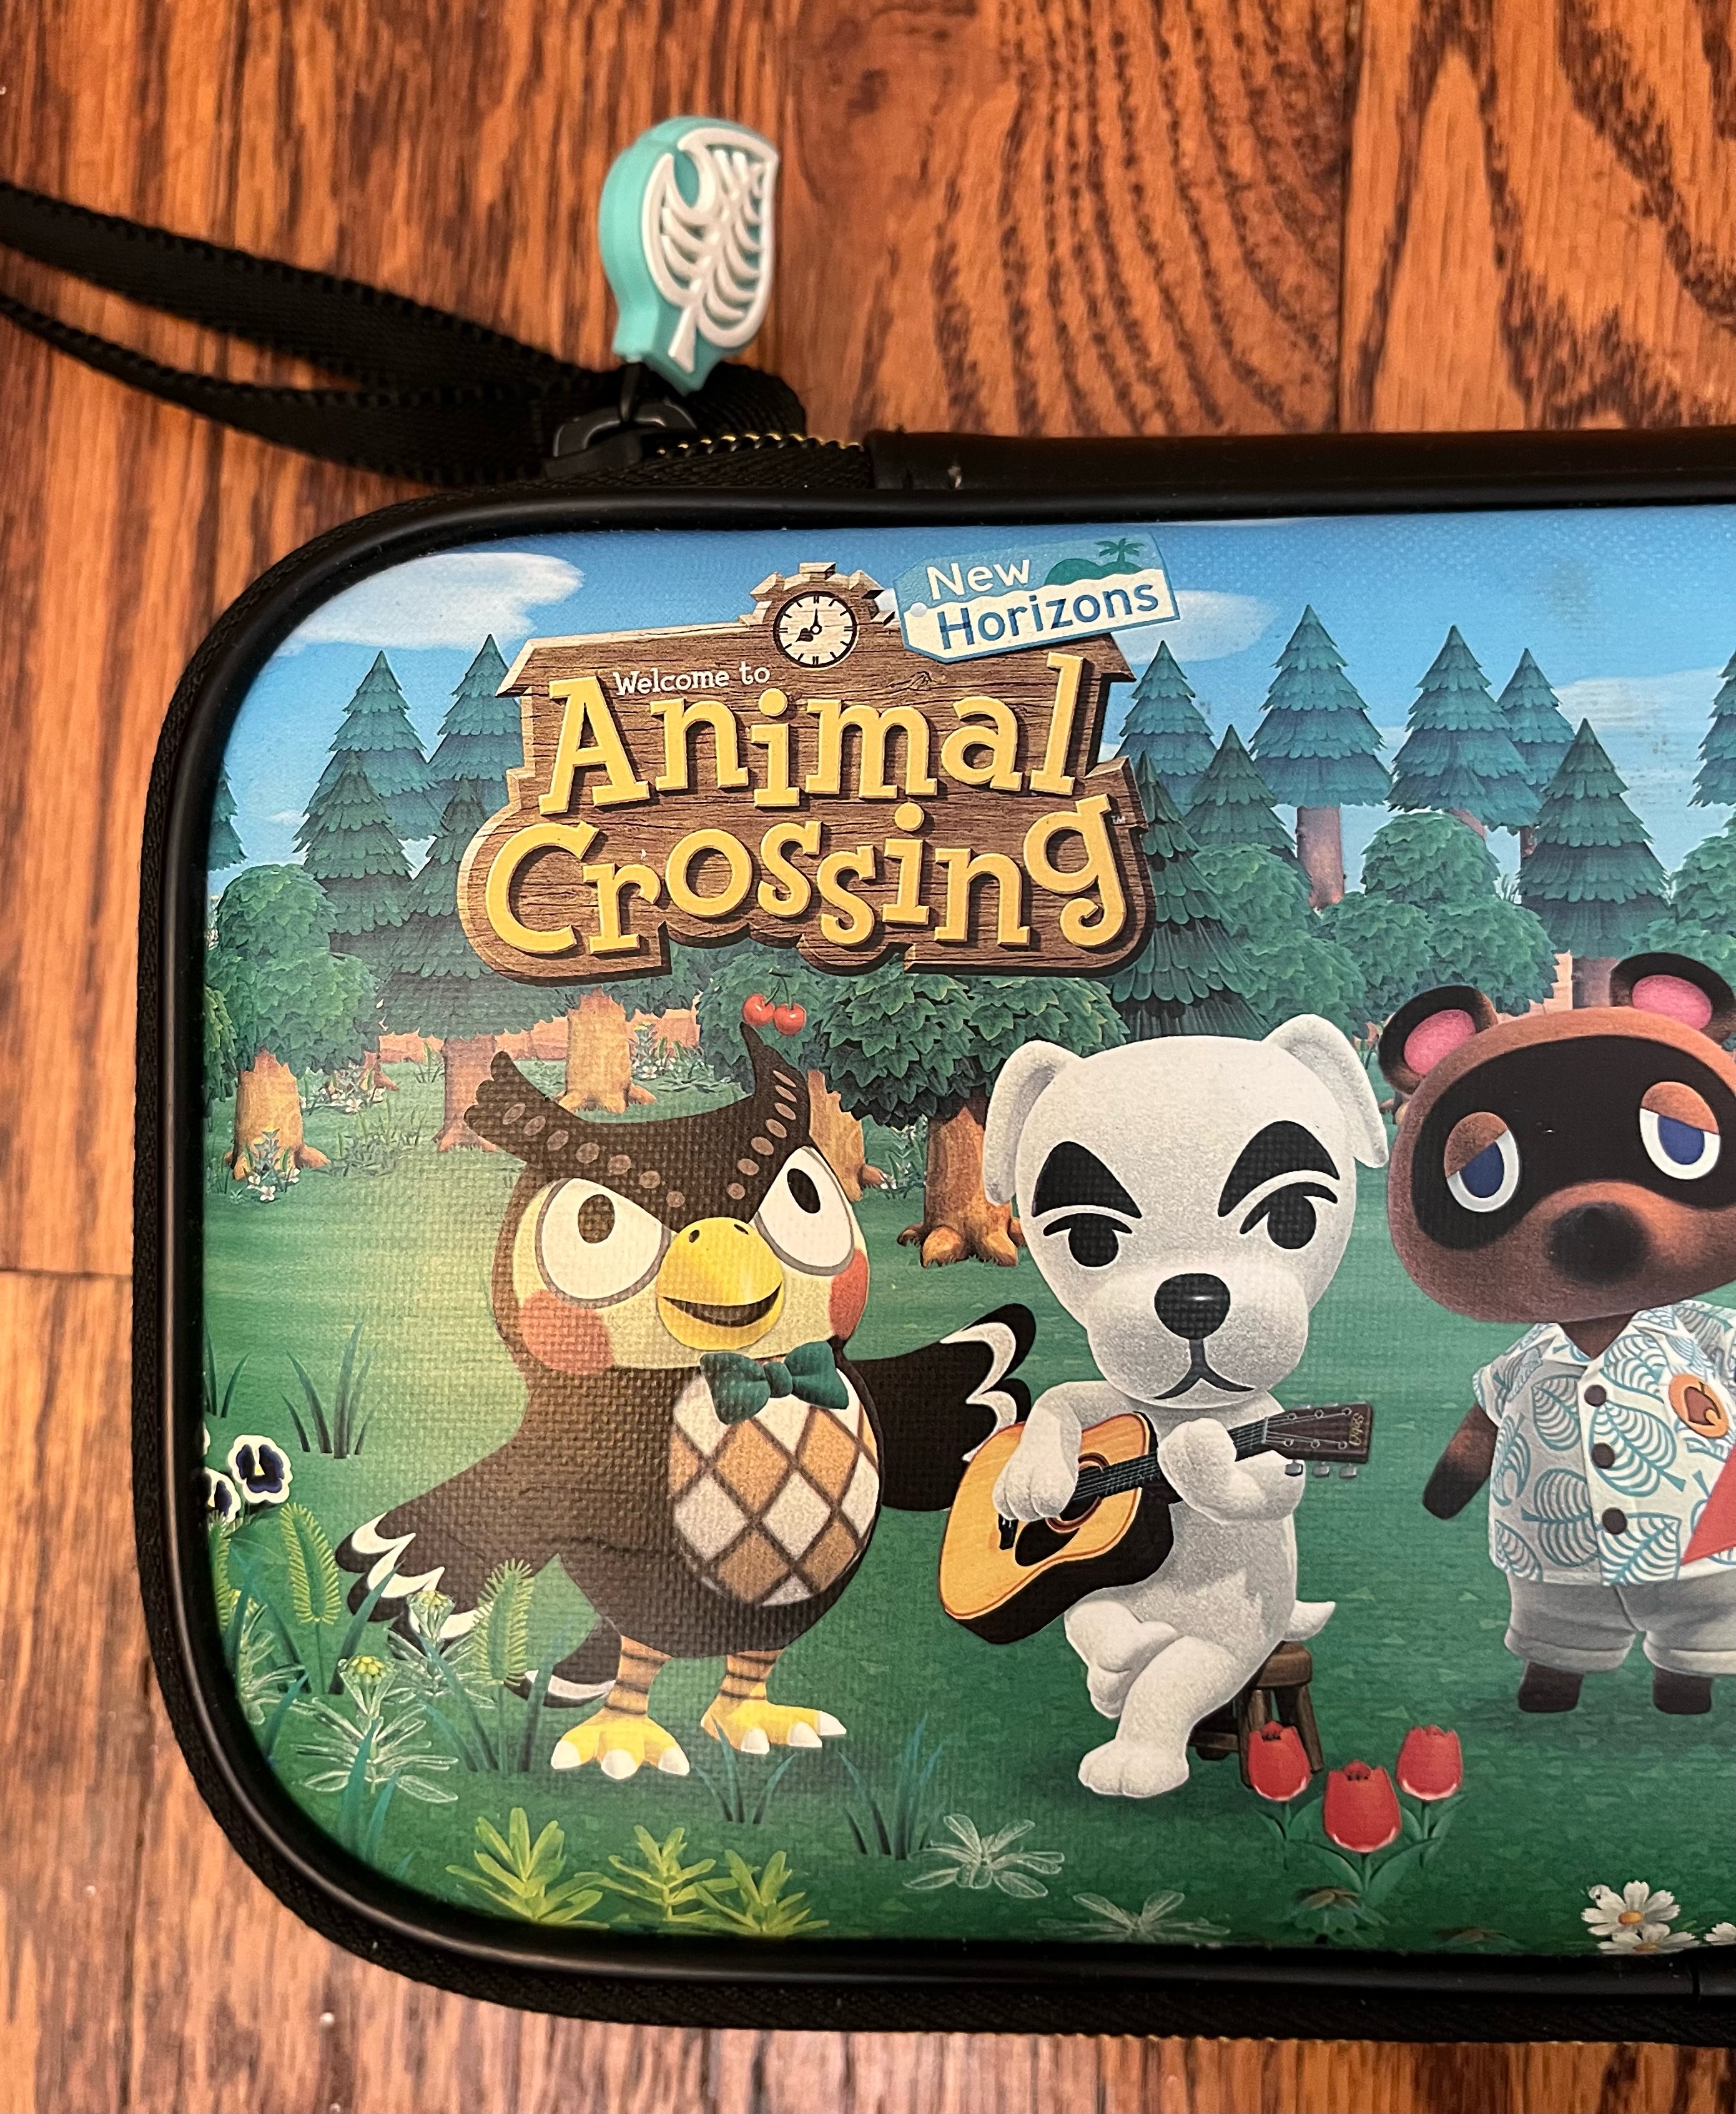 Animal Crossing Nintendo Switch case cover with Blathers the owl and K.K. Slider singer dog and Tom Nook